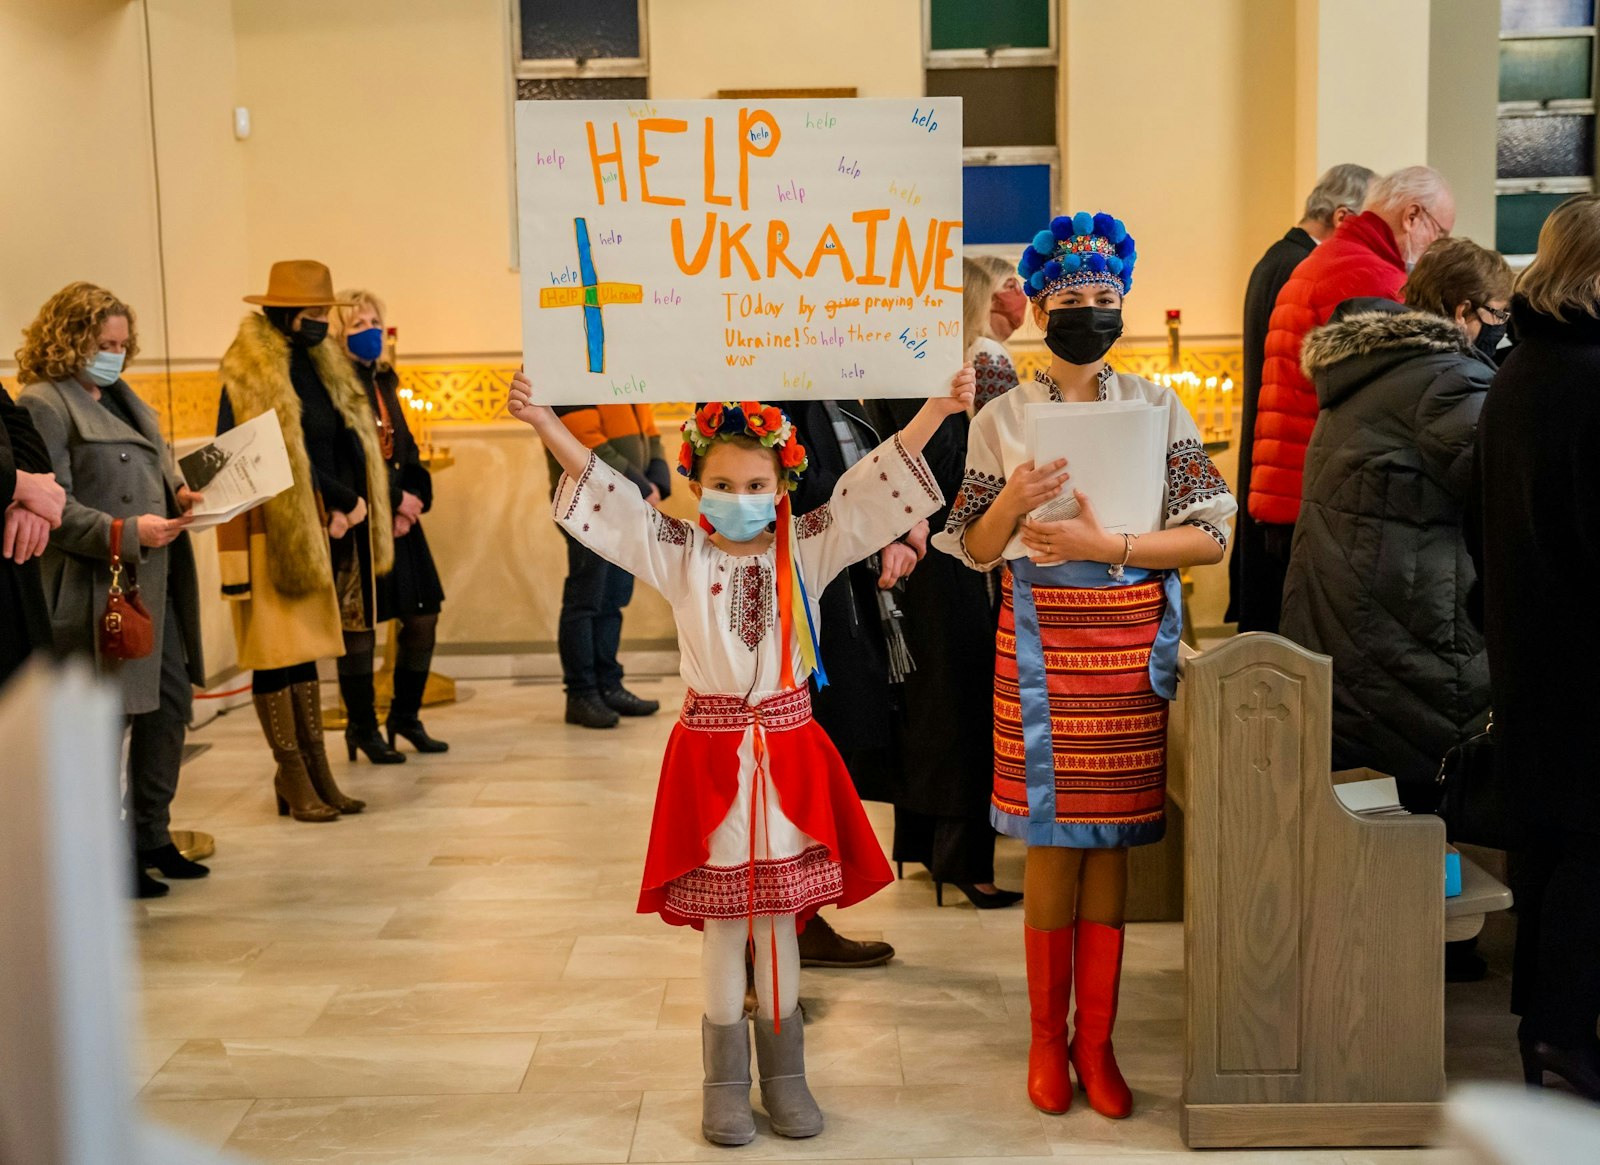 A young girl holds a sign in support of her ancestral homeland. Many local Ukrainians maintain strong ties to the eastern European nation, visiting friends and family often. (Valaurian Waller | Detroit Catholic)